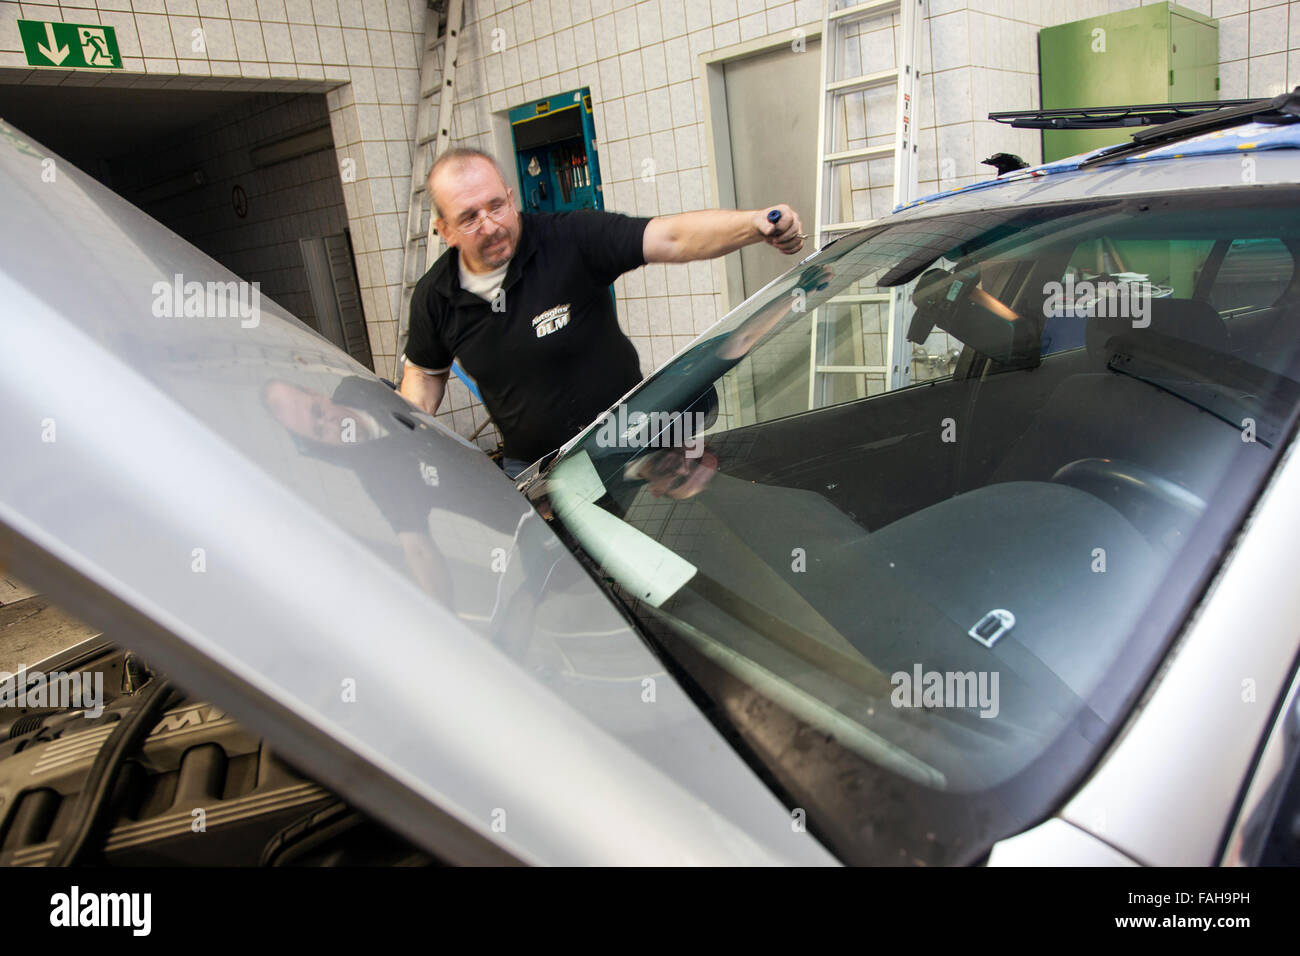 Replace the windscreen in an auto glass workshop. Stock Photo